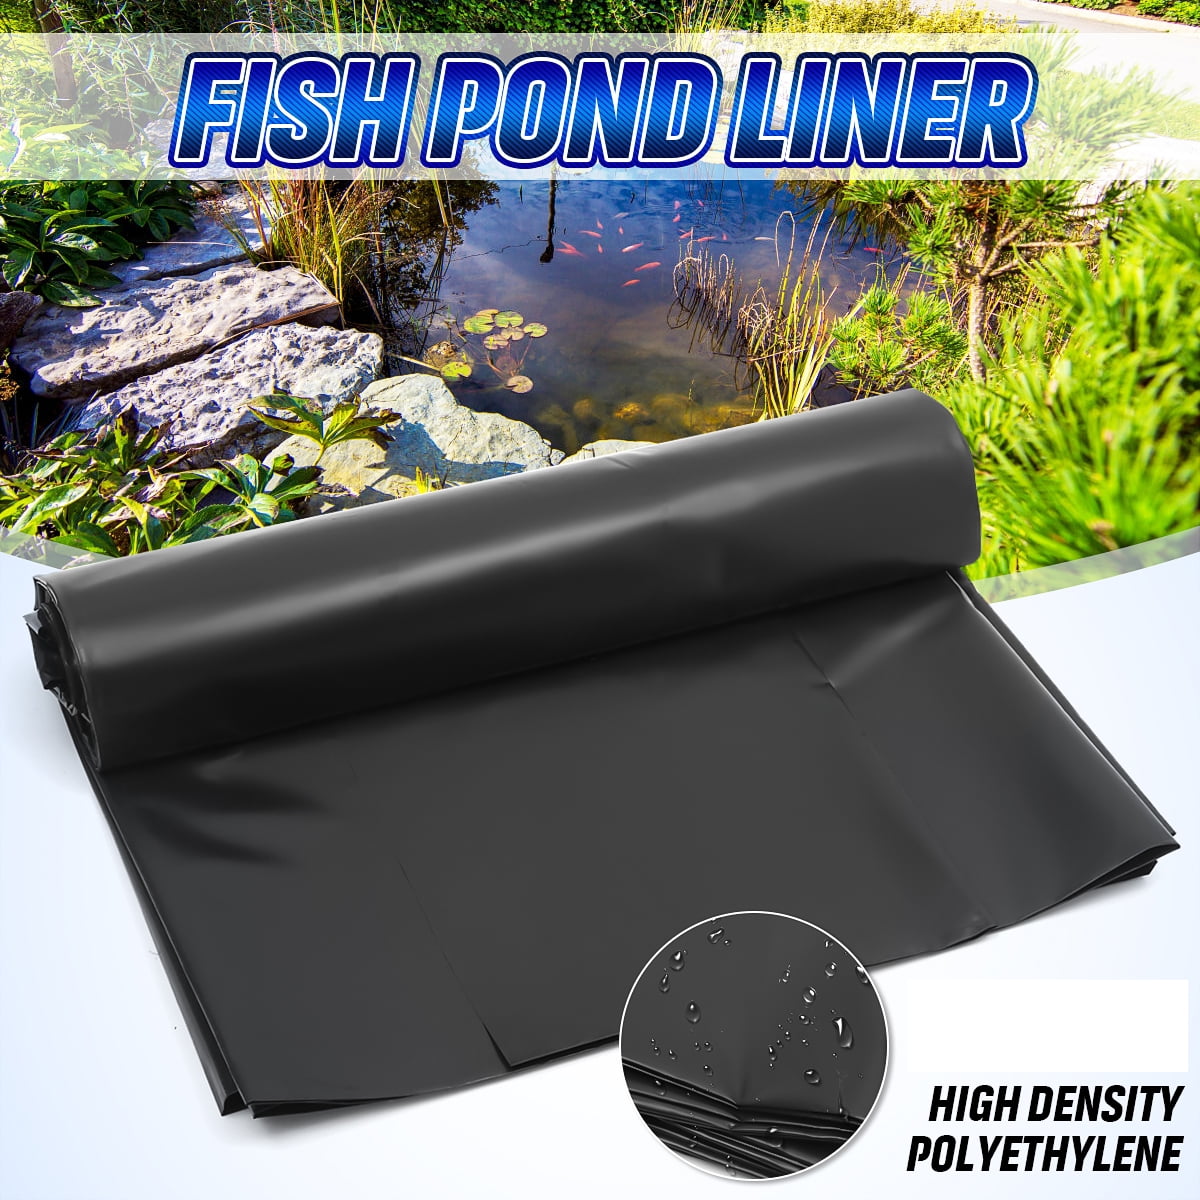 x 10 ft 45 Mil EPDM Anjon LifeGuard Pond Liner w/ 25 Year Warranty Details about   8 ft 